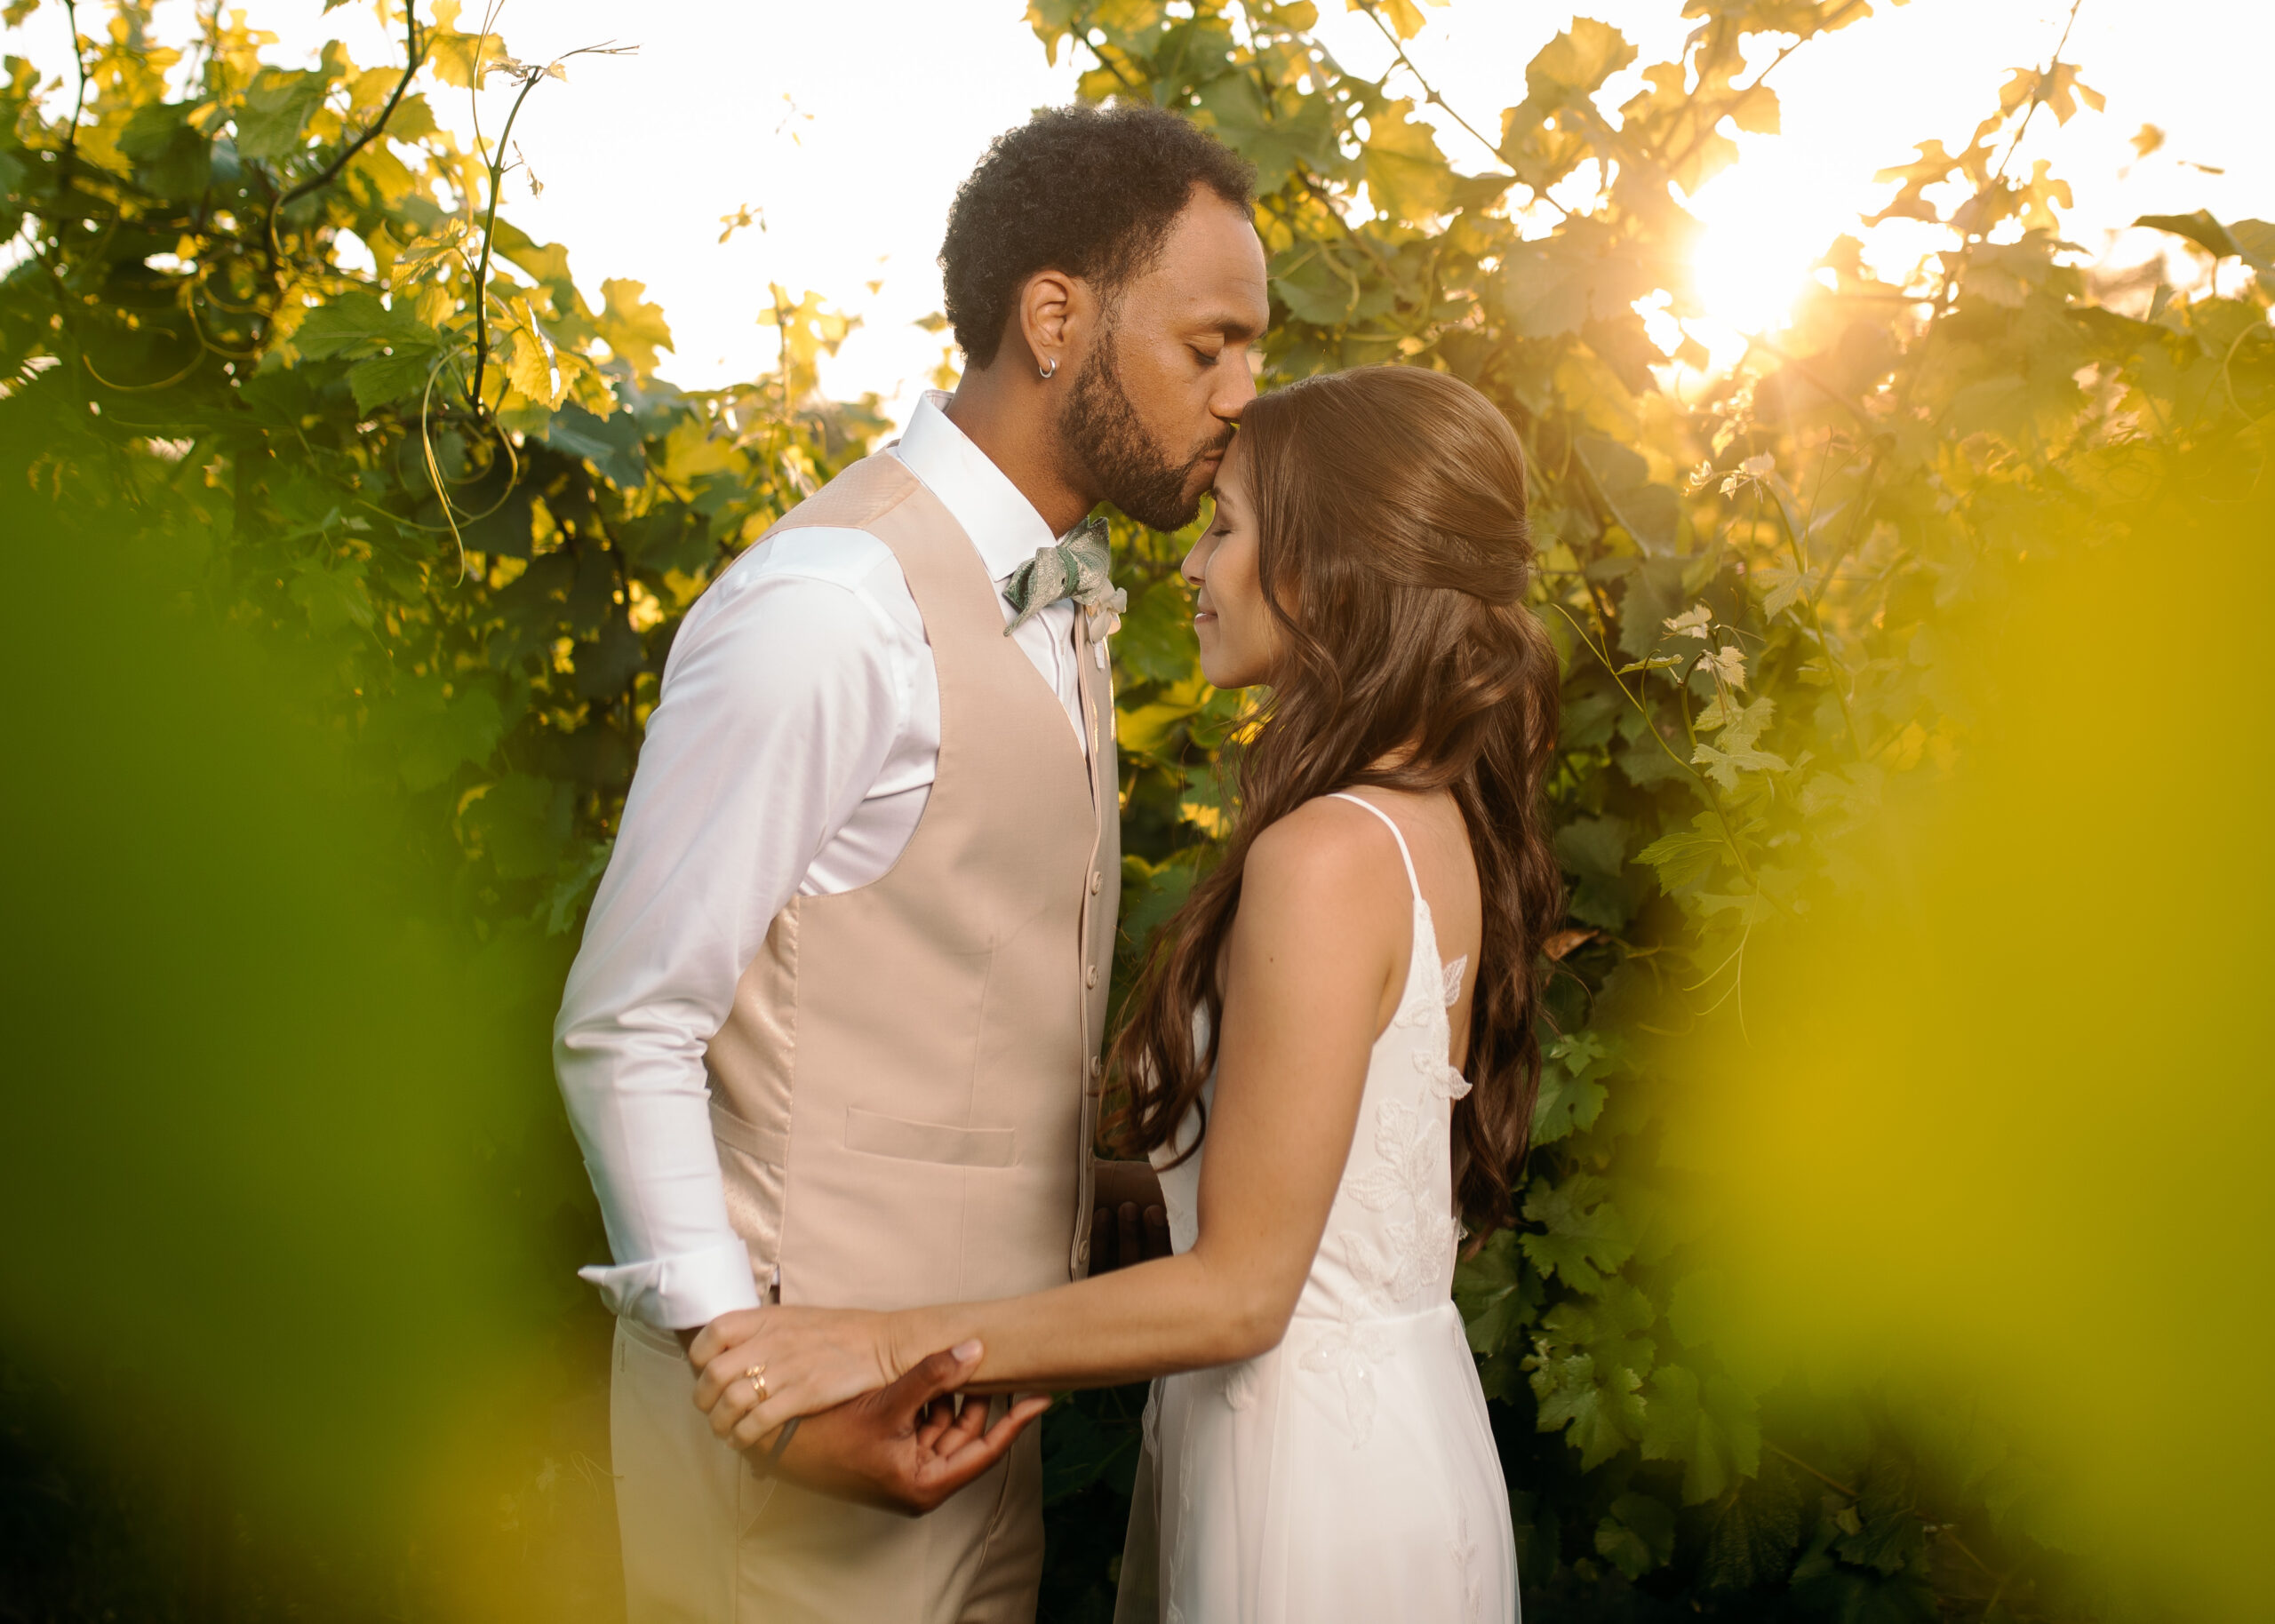 Photographty of a couple on their wedding day at Oswego Hills Vineyard in Oregon